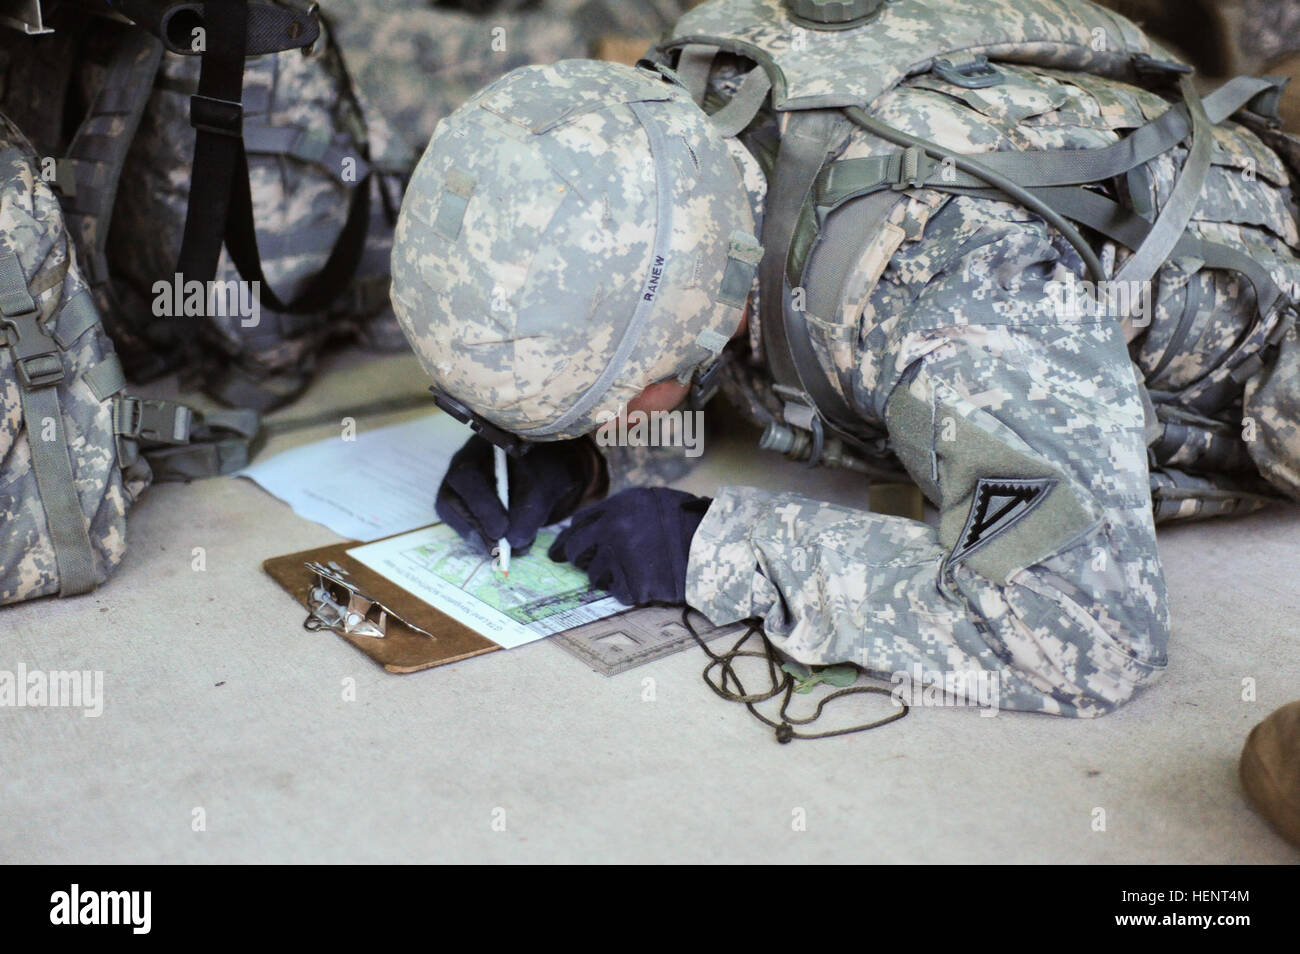 U.S. Army Pvt. Benjamin Ranew, assigned to B Company, 1st Battalion, 4th Infantry Regiment, Joint Multinational Training Command,  plots coordinates on a map during the land navigation portion of the  European Best Warrior Competition in Grafenwoehr, Germany, Sept. 14, 2014. The competition is a weeklong event that pushes Soldiers to the limits of their physical stamina, bearing, knowledge, adaptability and technical and tactical skills. The best warriors are ready and resilient Soldiers who live the Army values and lead from the front. (U.S. Army photo by Staff Sgt. Pablo N. Piedra/Released)  Stock Photo